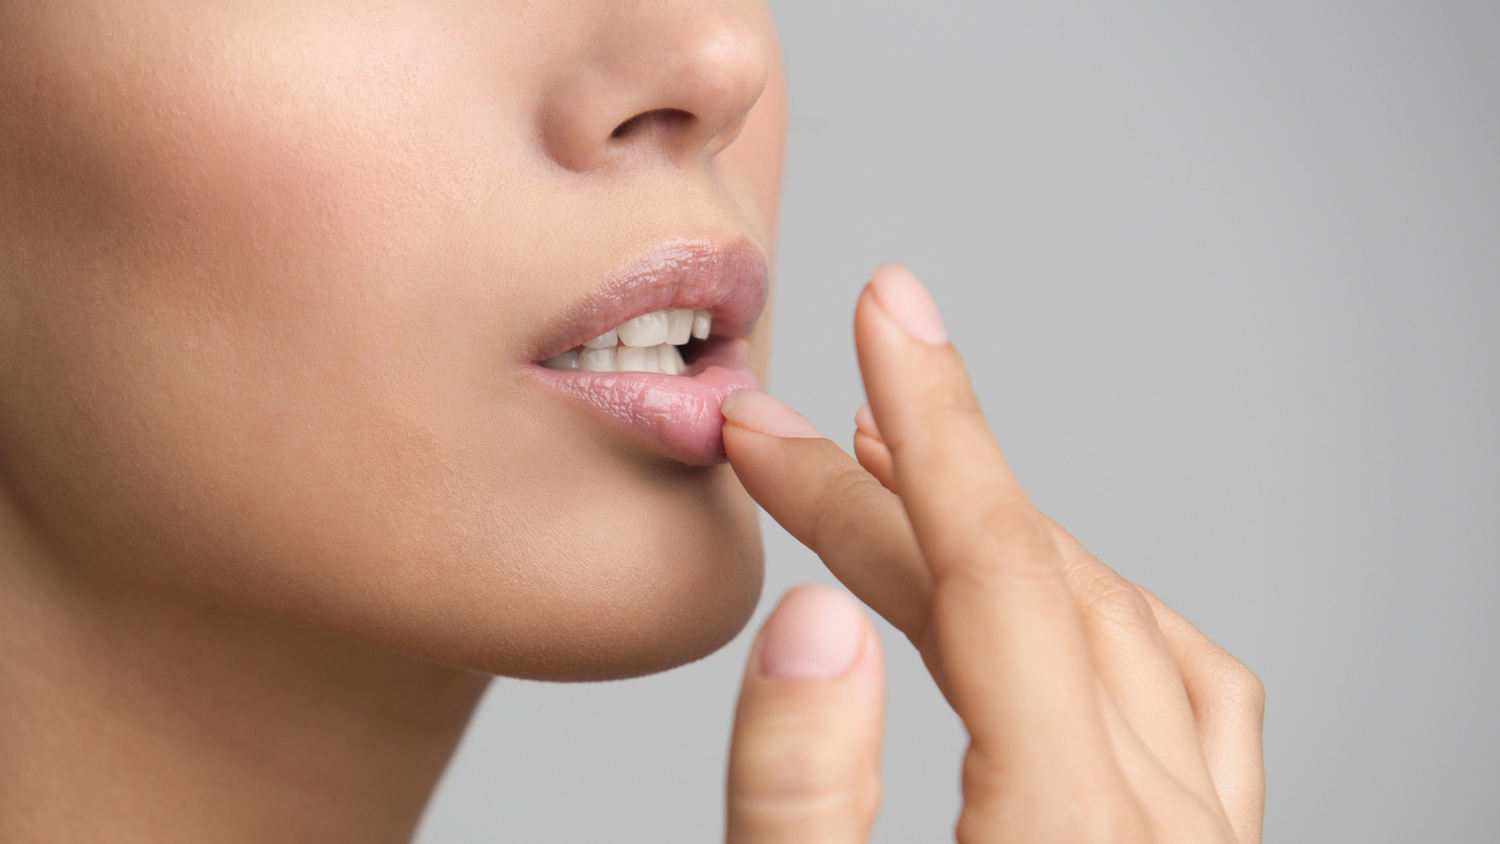 Lip Care Tips for Healthy, Hydrated Lips